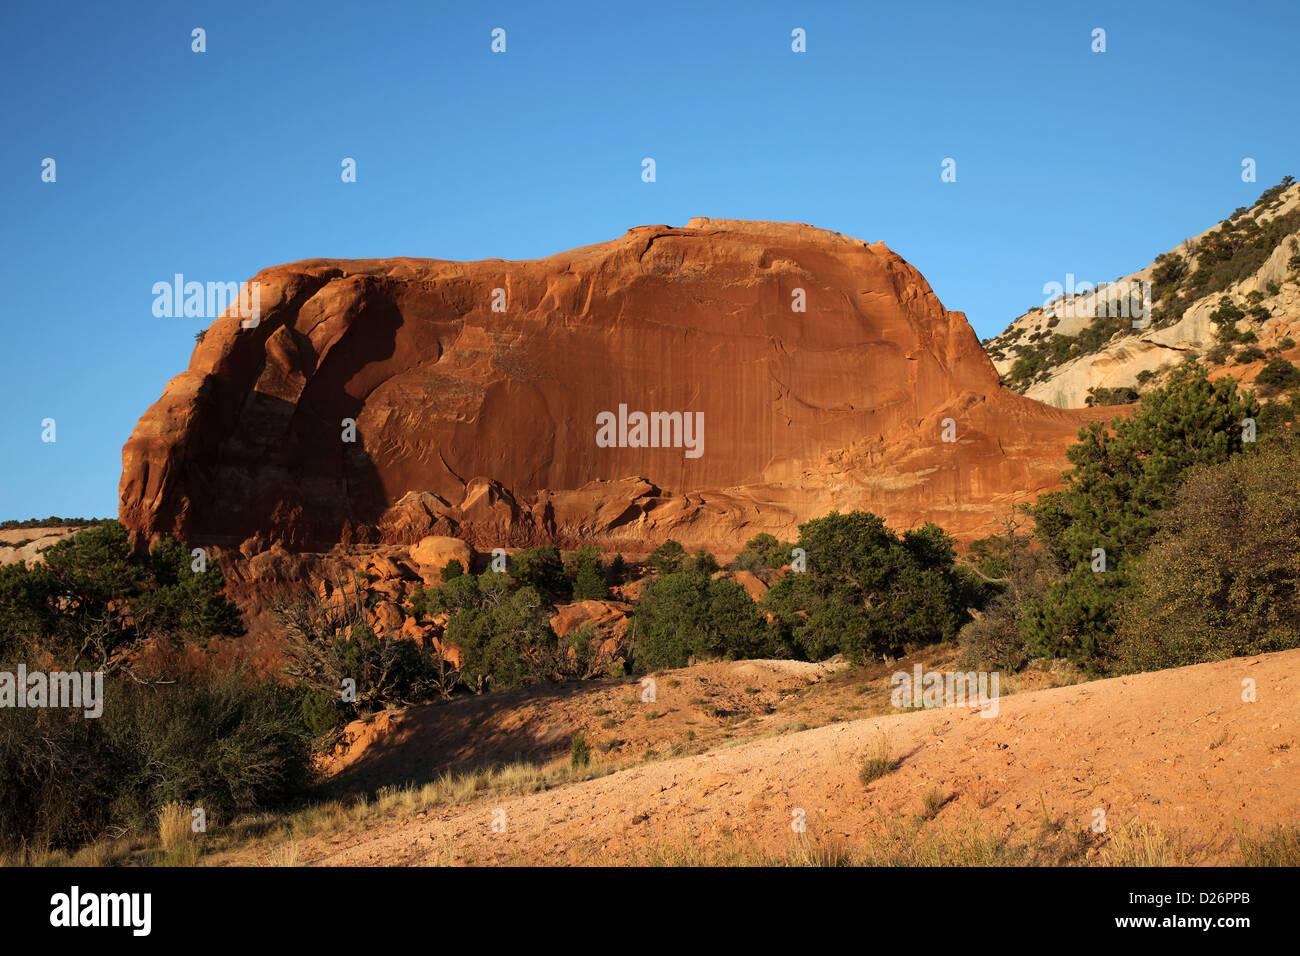 Red rock cliff resembling car Stock Photo